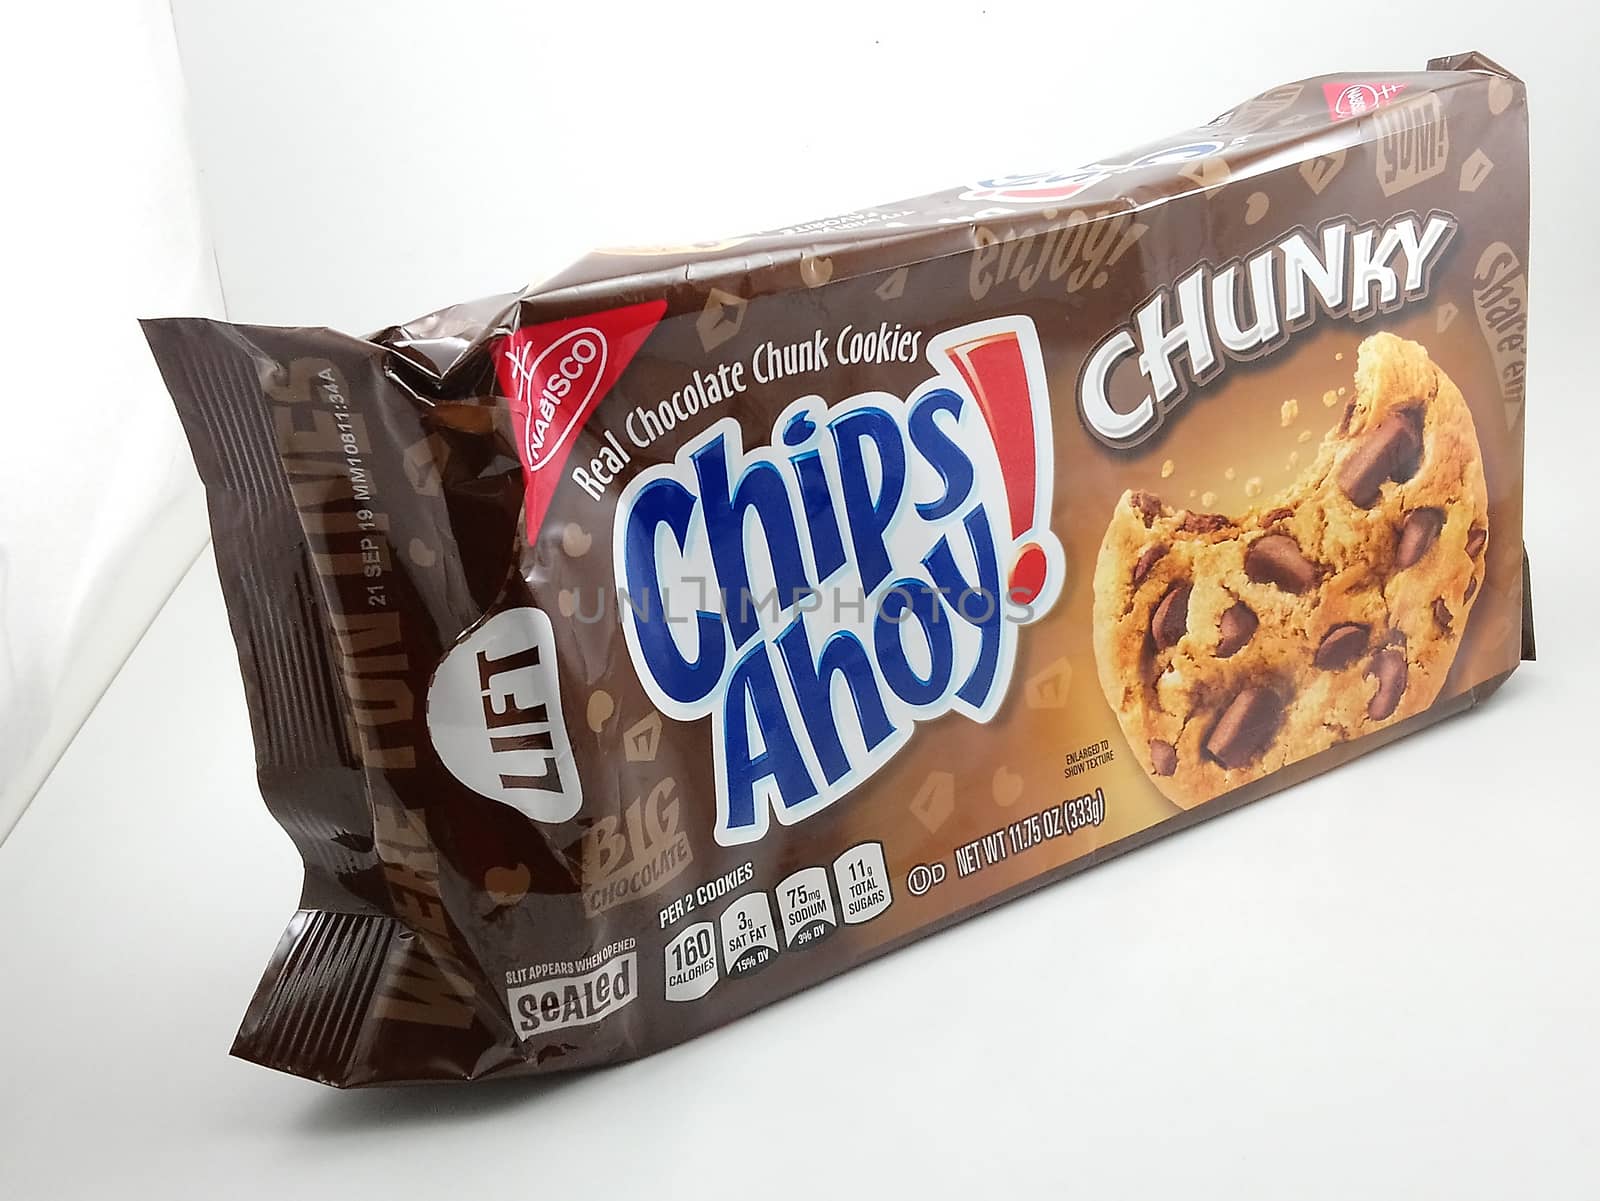 Chips ahoy chunky cookies in Manila, Philippines by imwaltersy